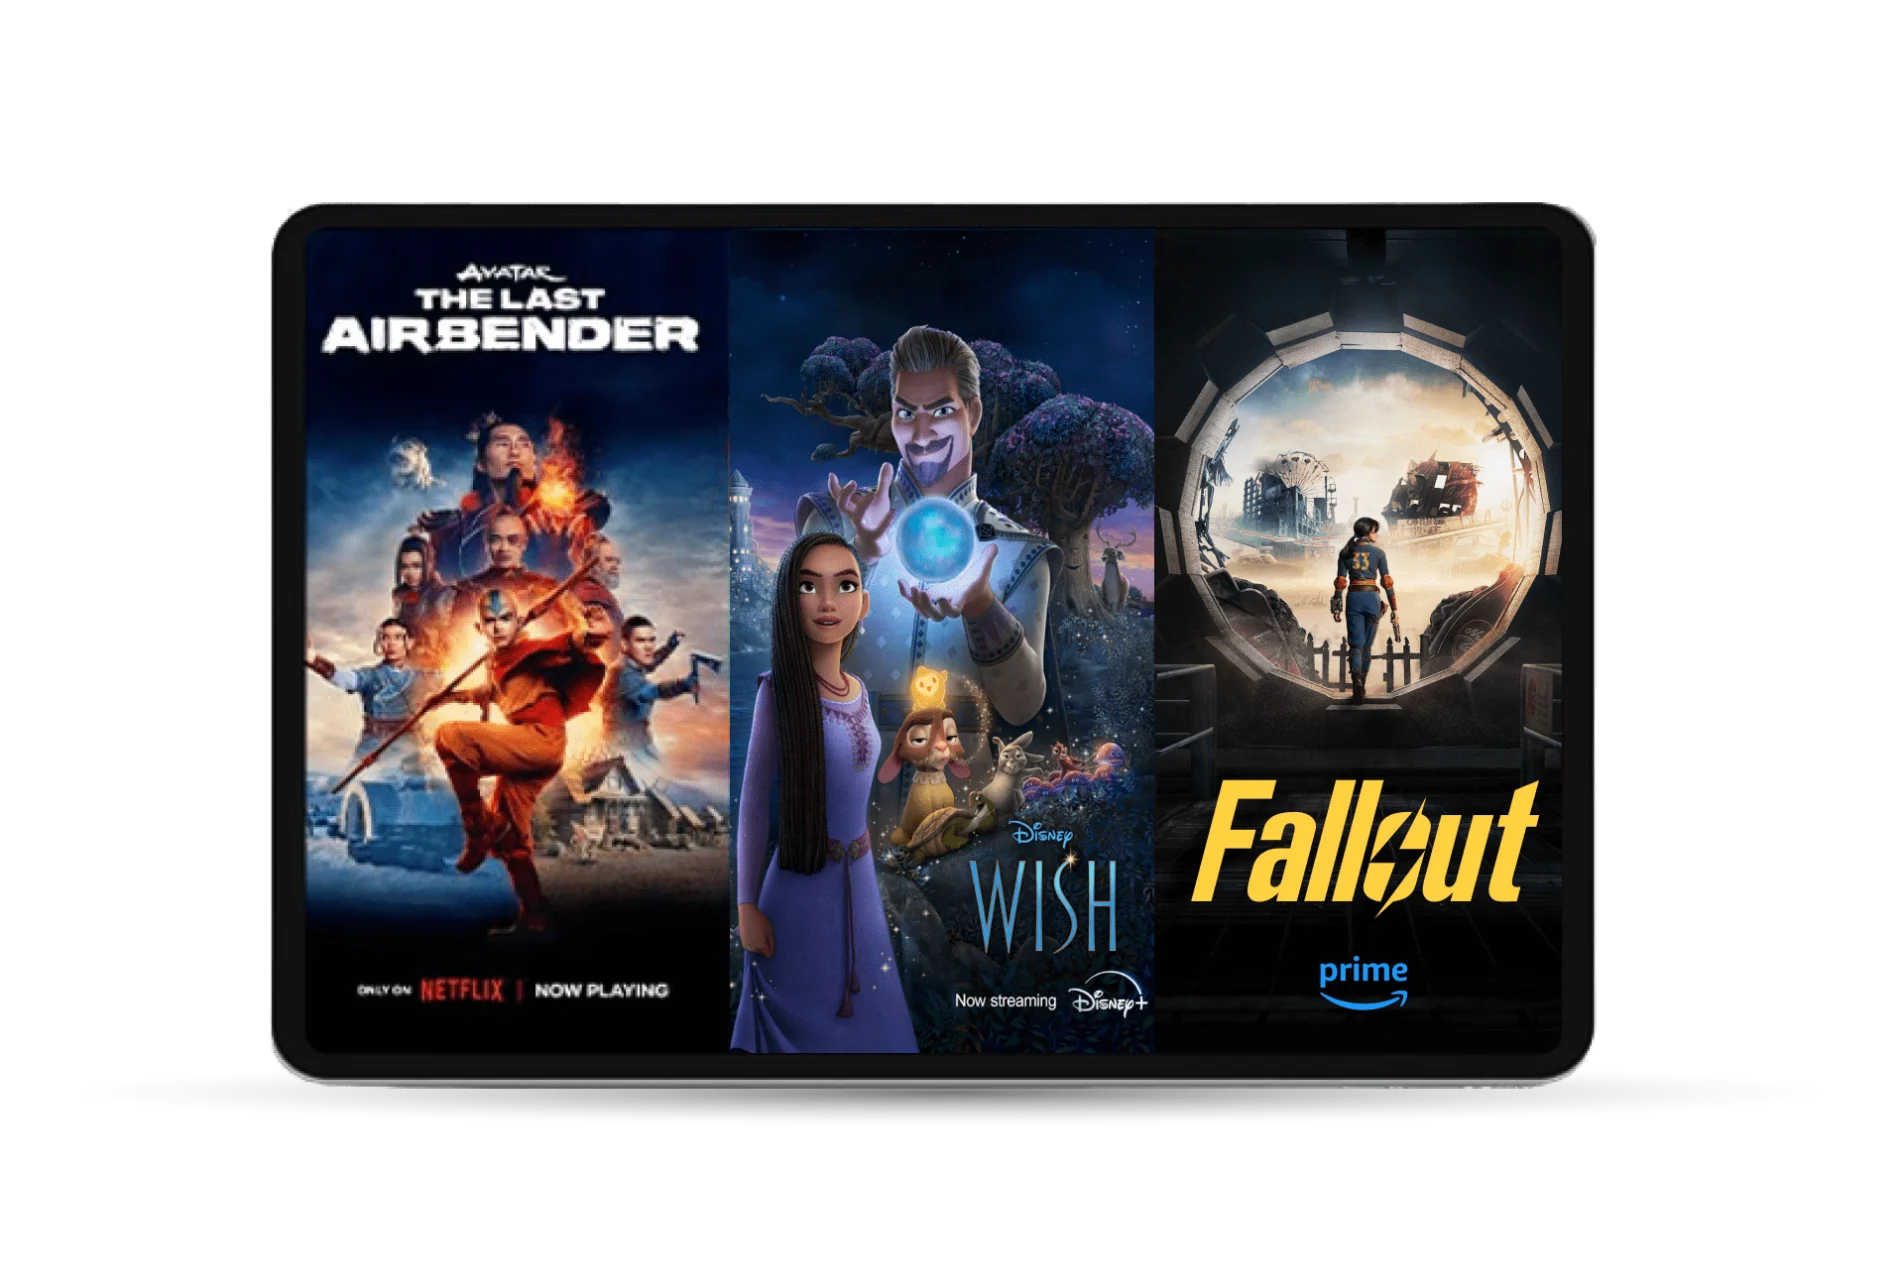 A TV screen that shows Netflix’s Avatar: The Last Airbender, Disney+’s Wish, and Prime Video’s Fallout.